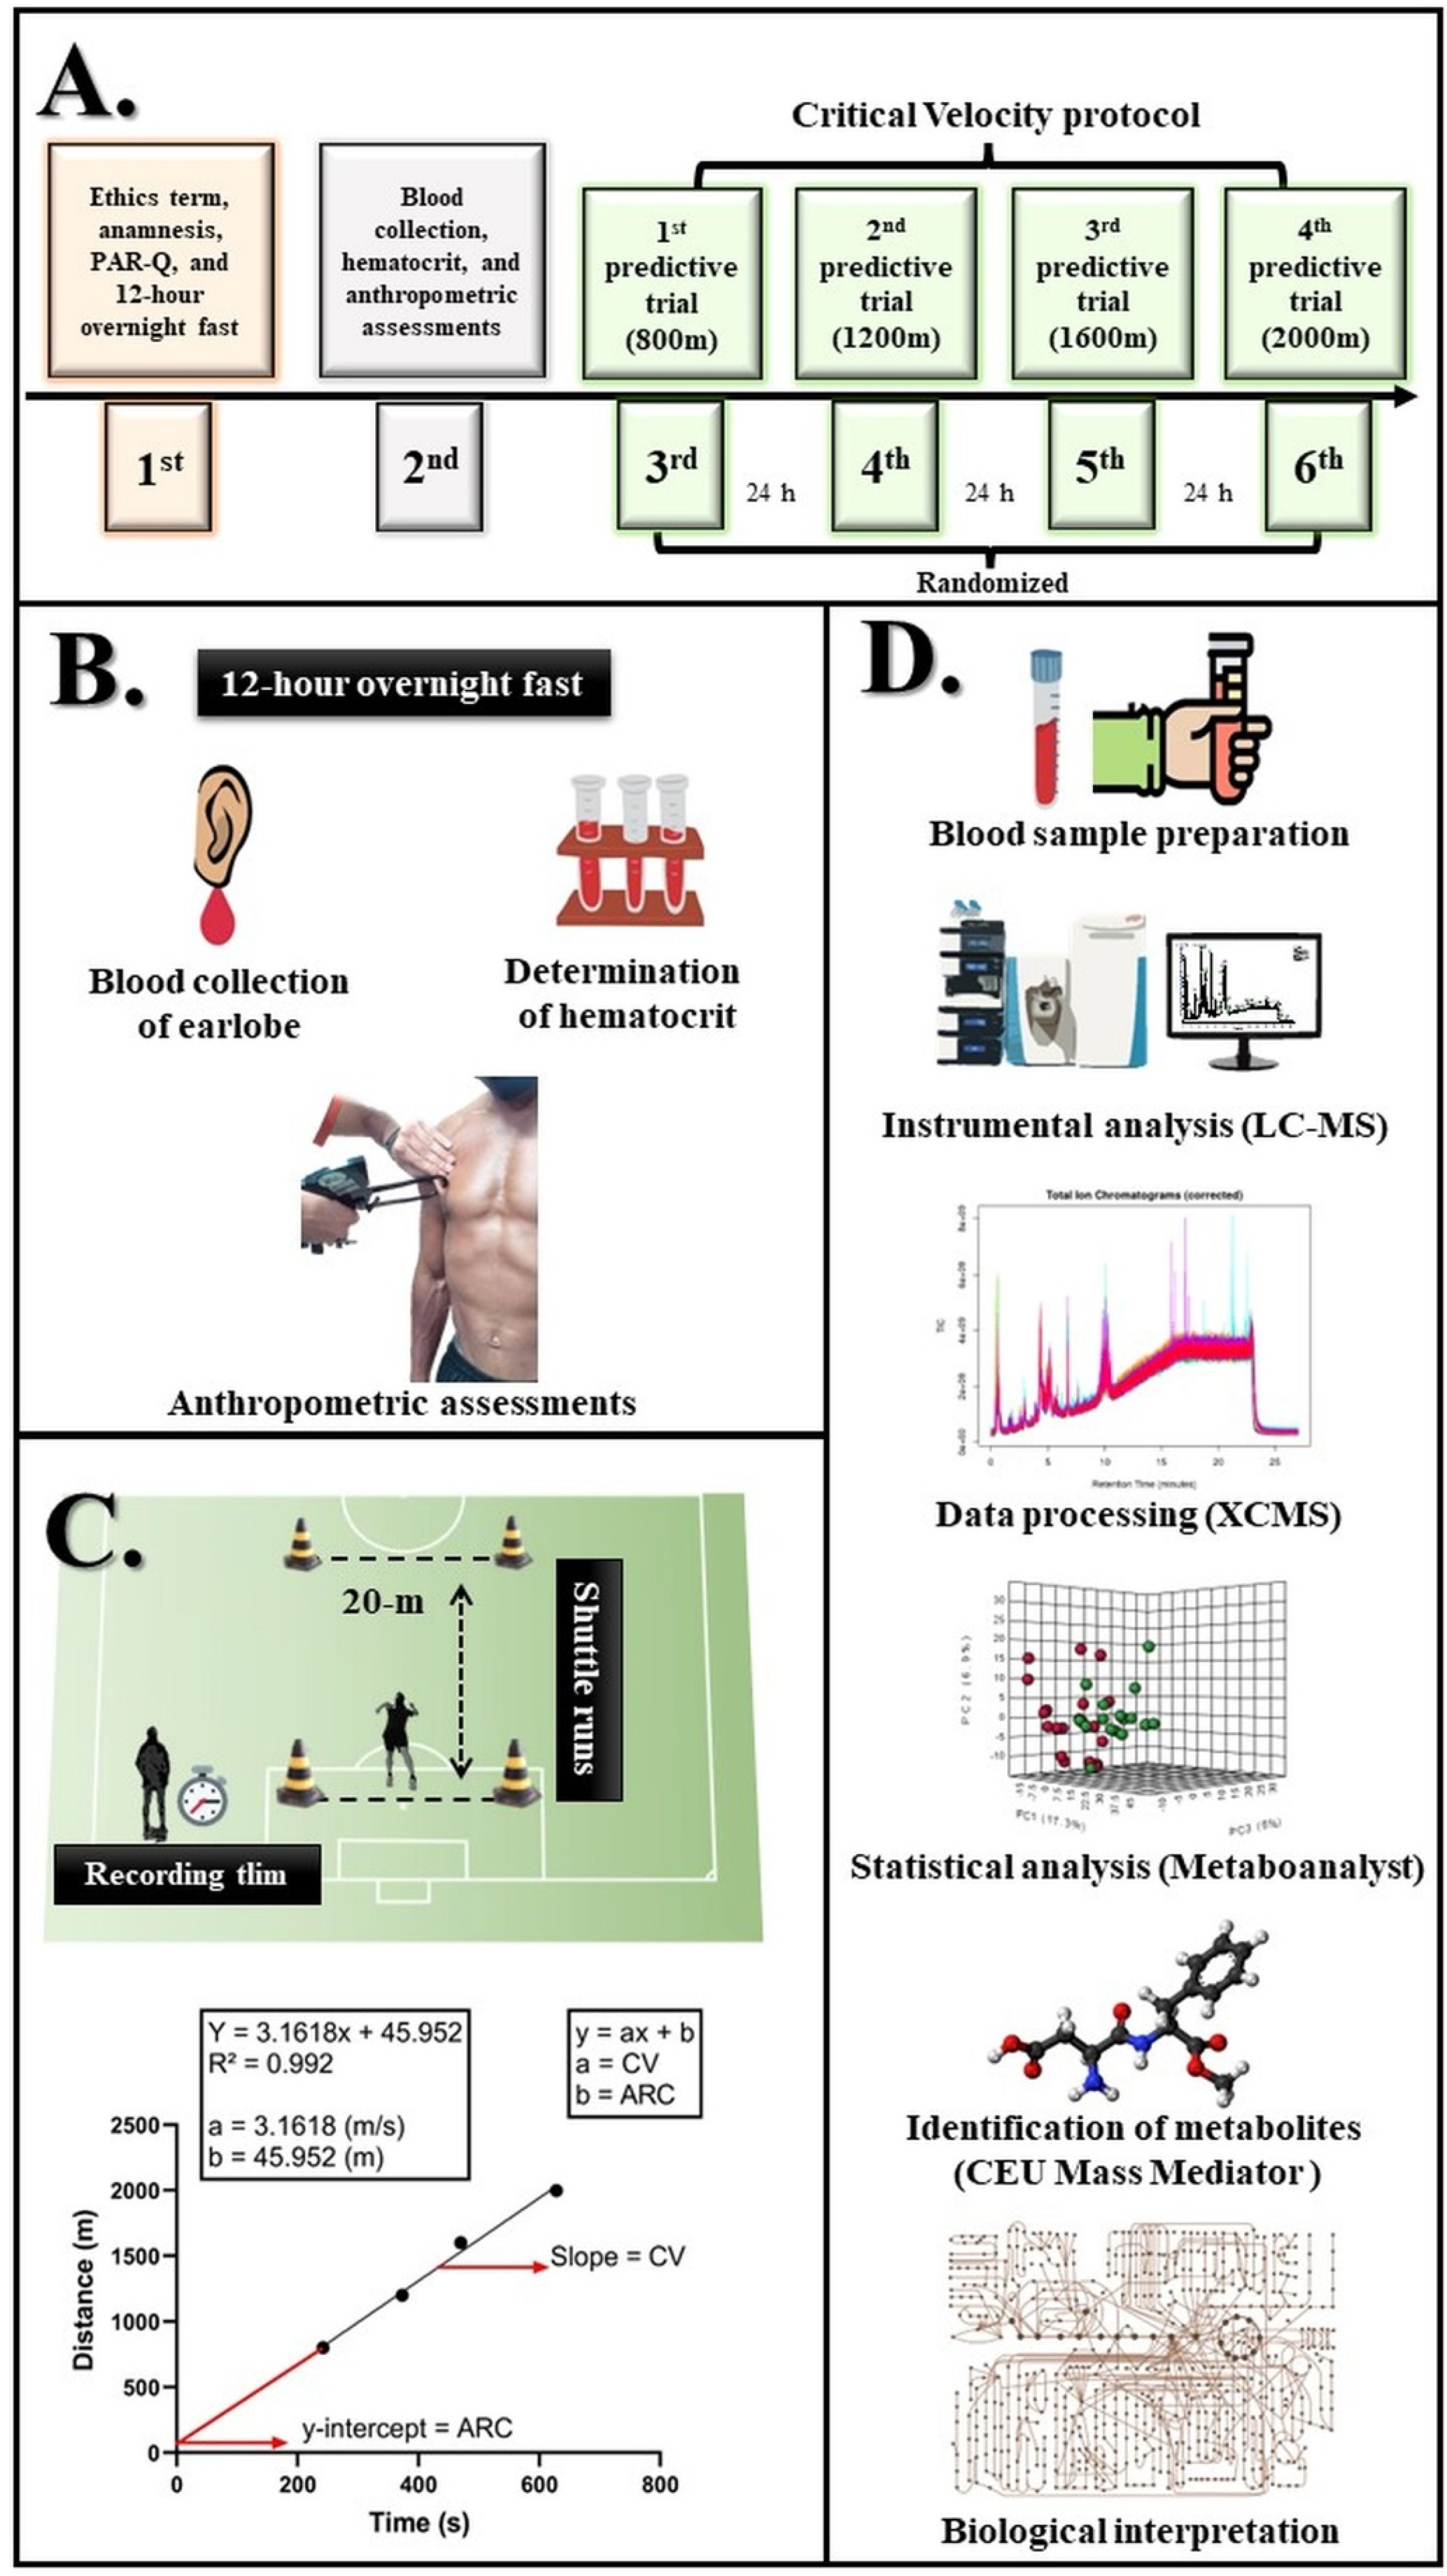 Biology Free Full-Text A Metabolomic Approach and Traditional Physical Assessments to Compare U22 Soccer Players According to Their Competitive Level image